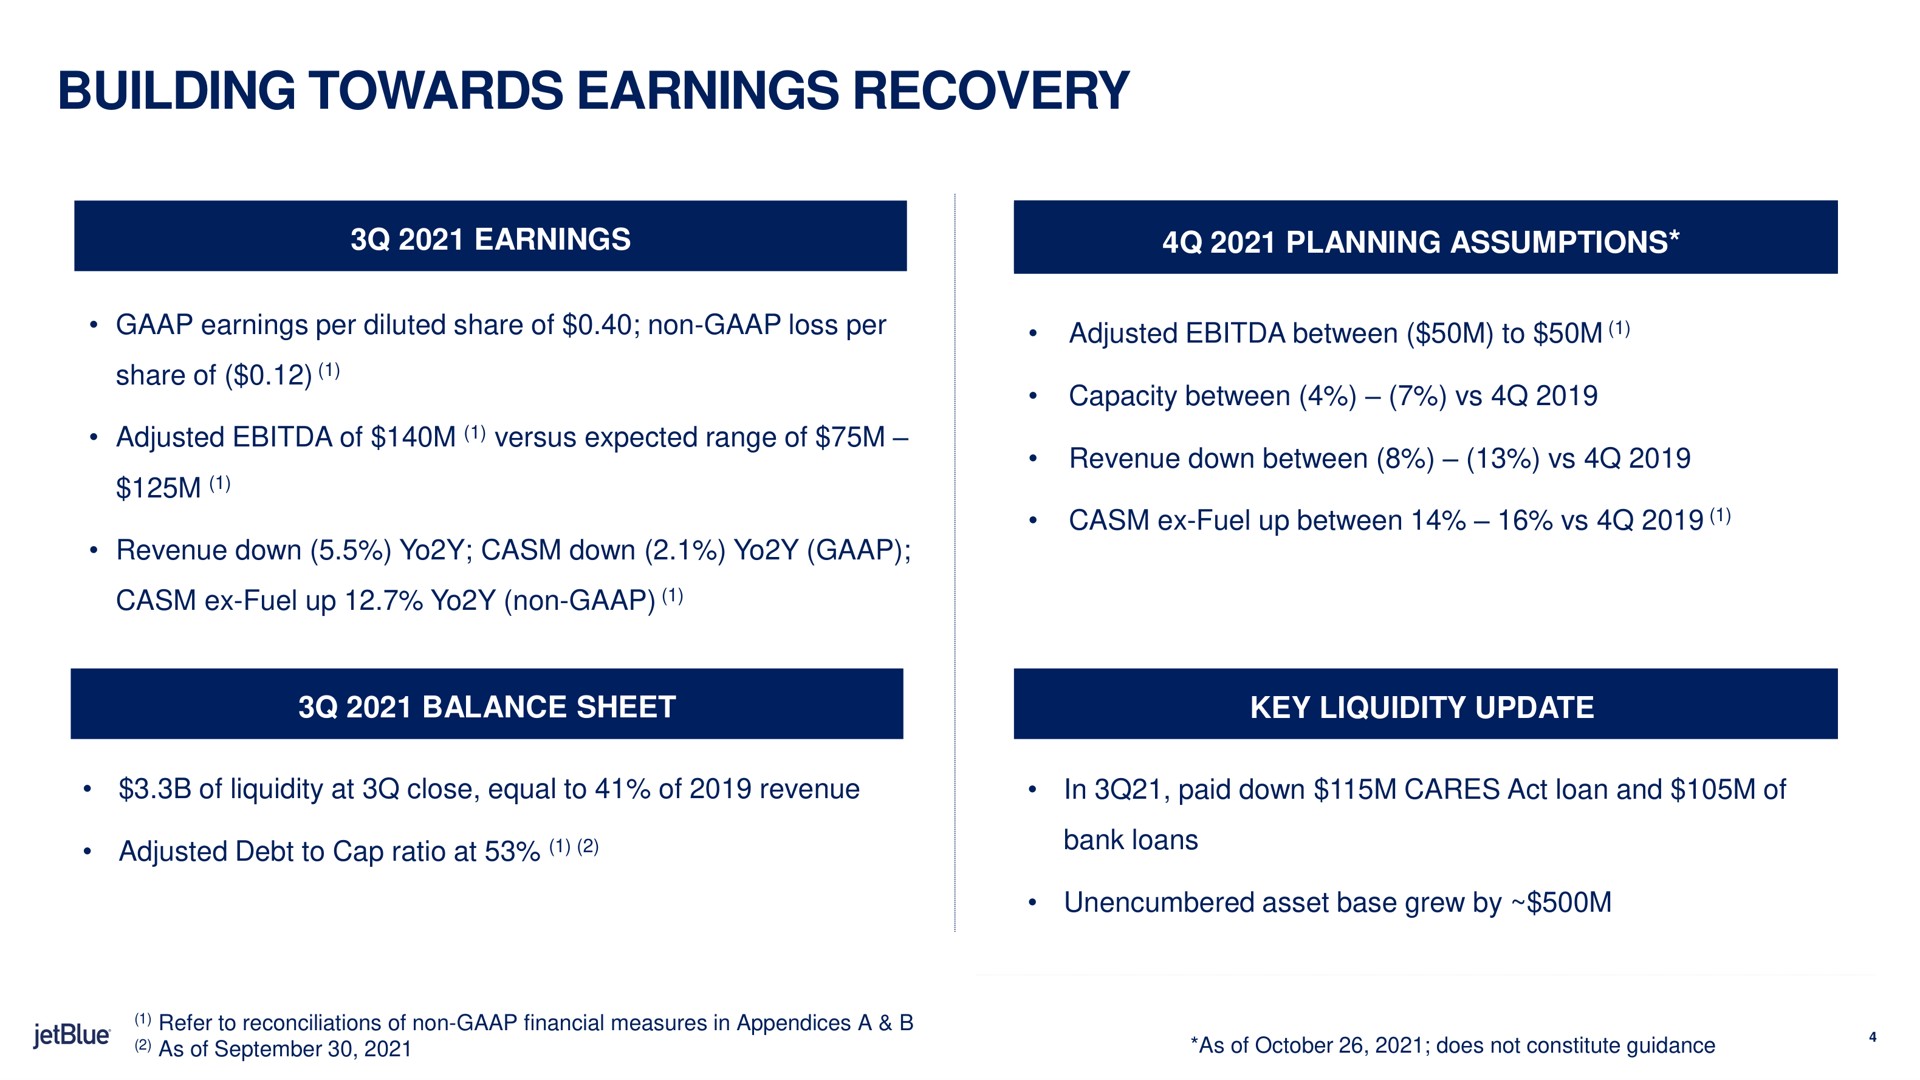 building towards earnings recovery revenue down down | jetBlue